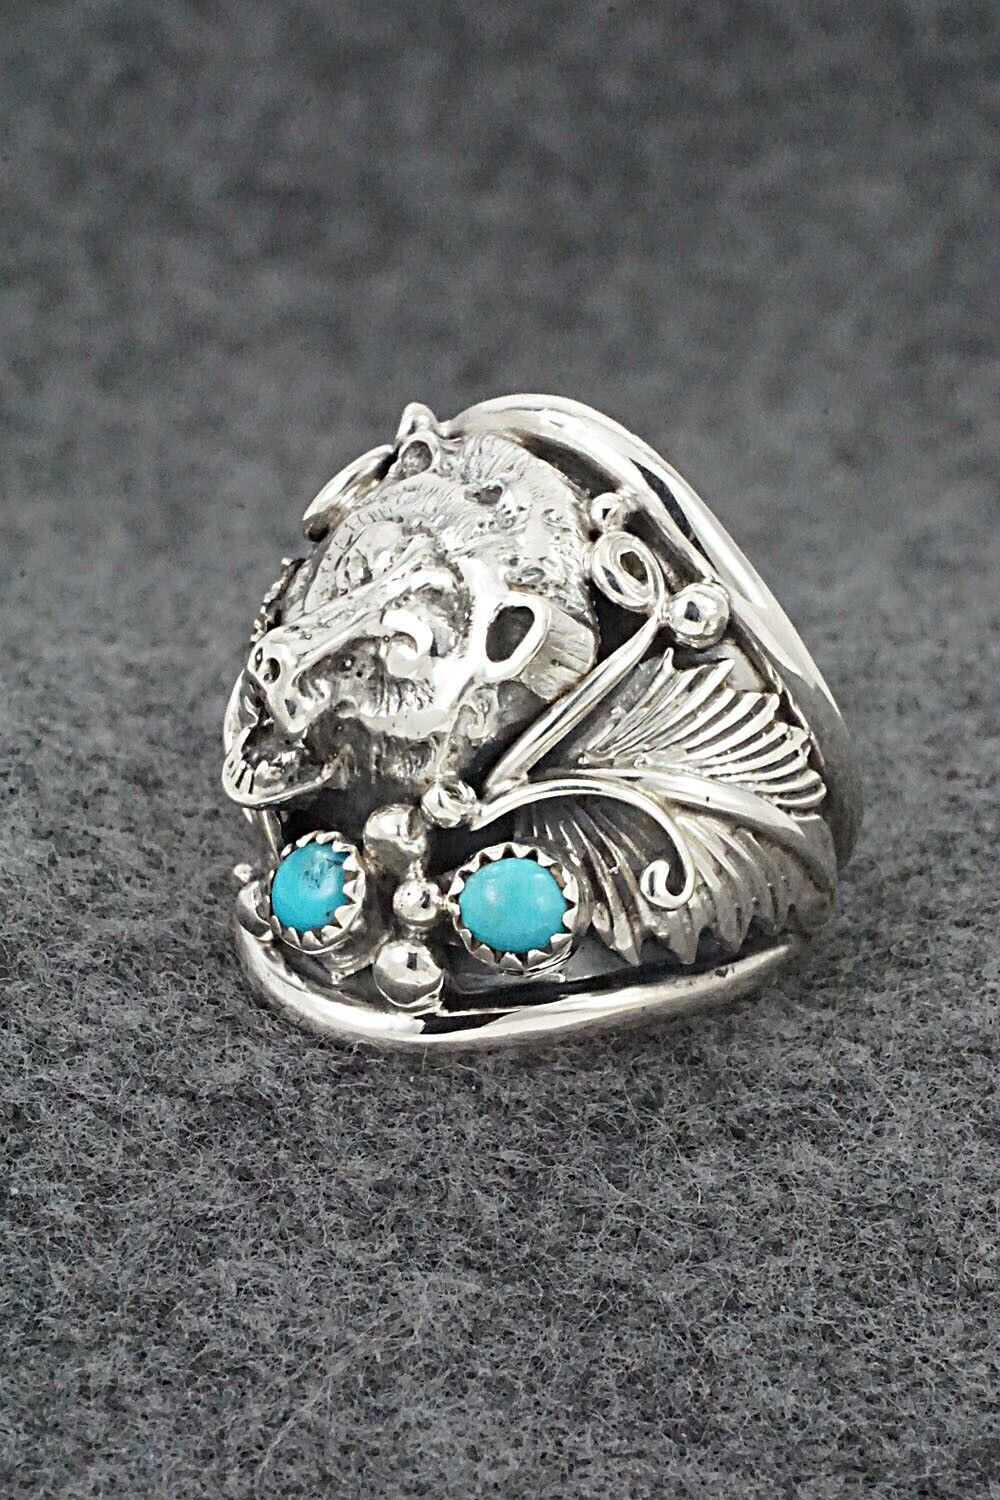 Turquoise & Sterling Silver Ring - Jeannette Saunders - Size 12